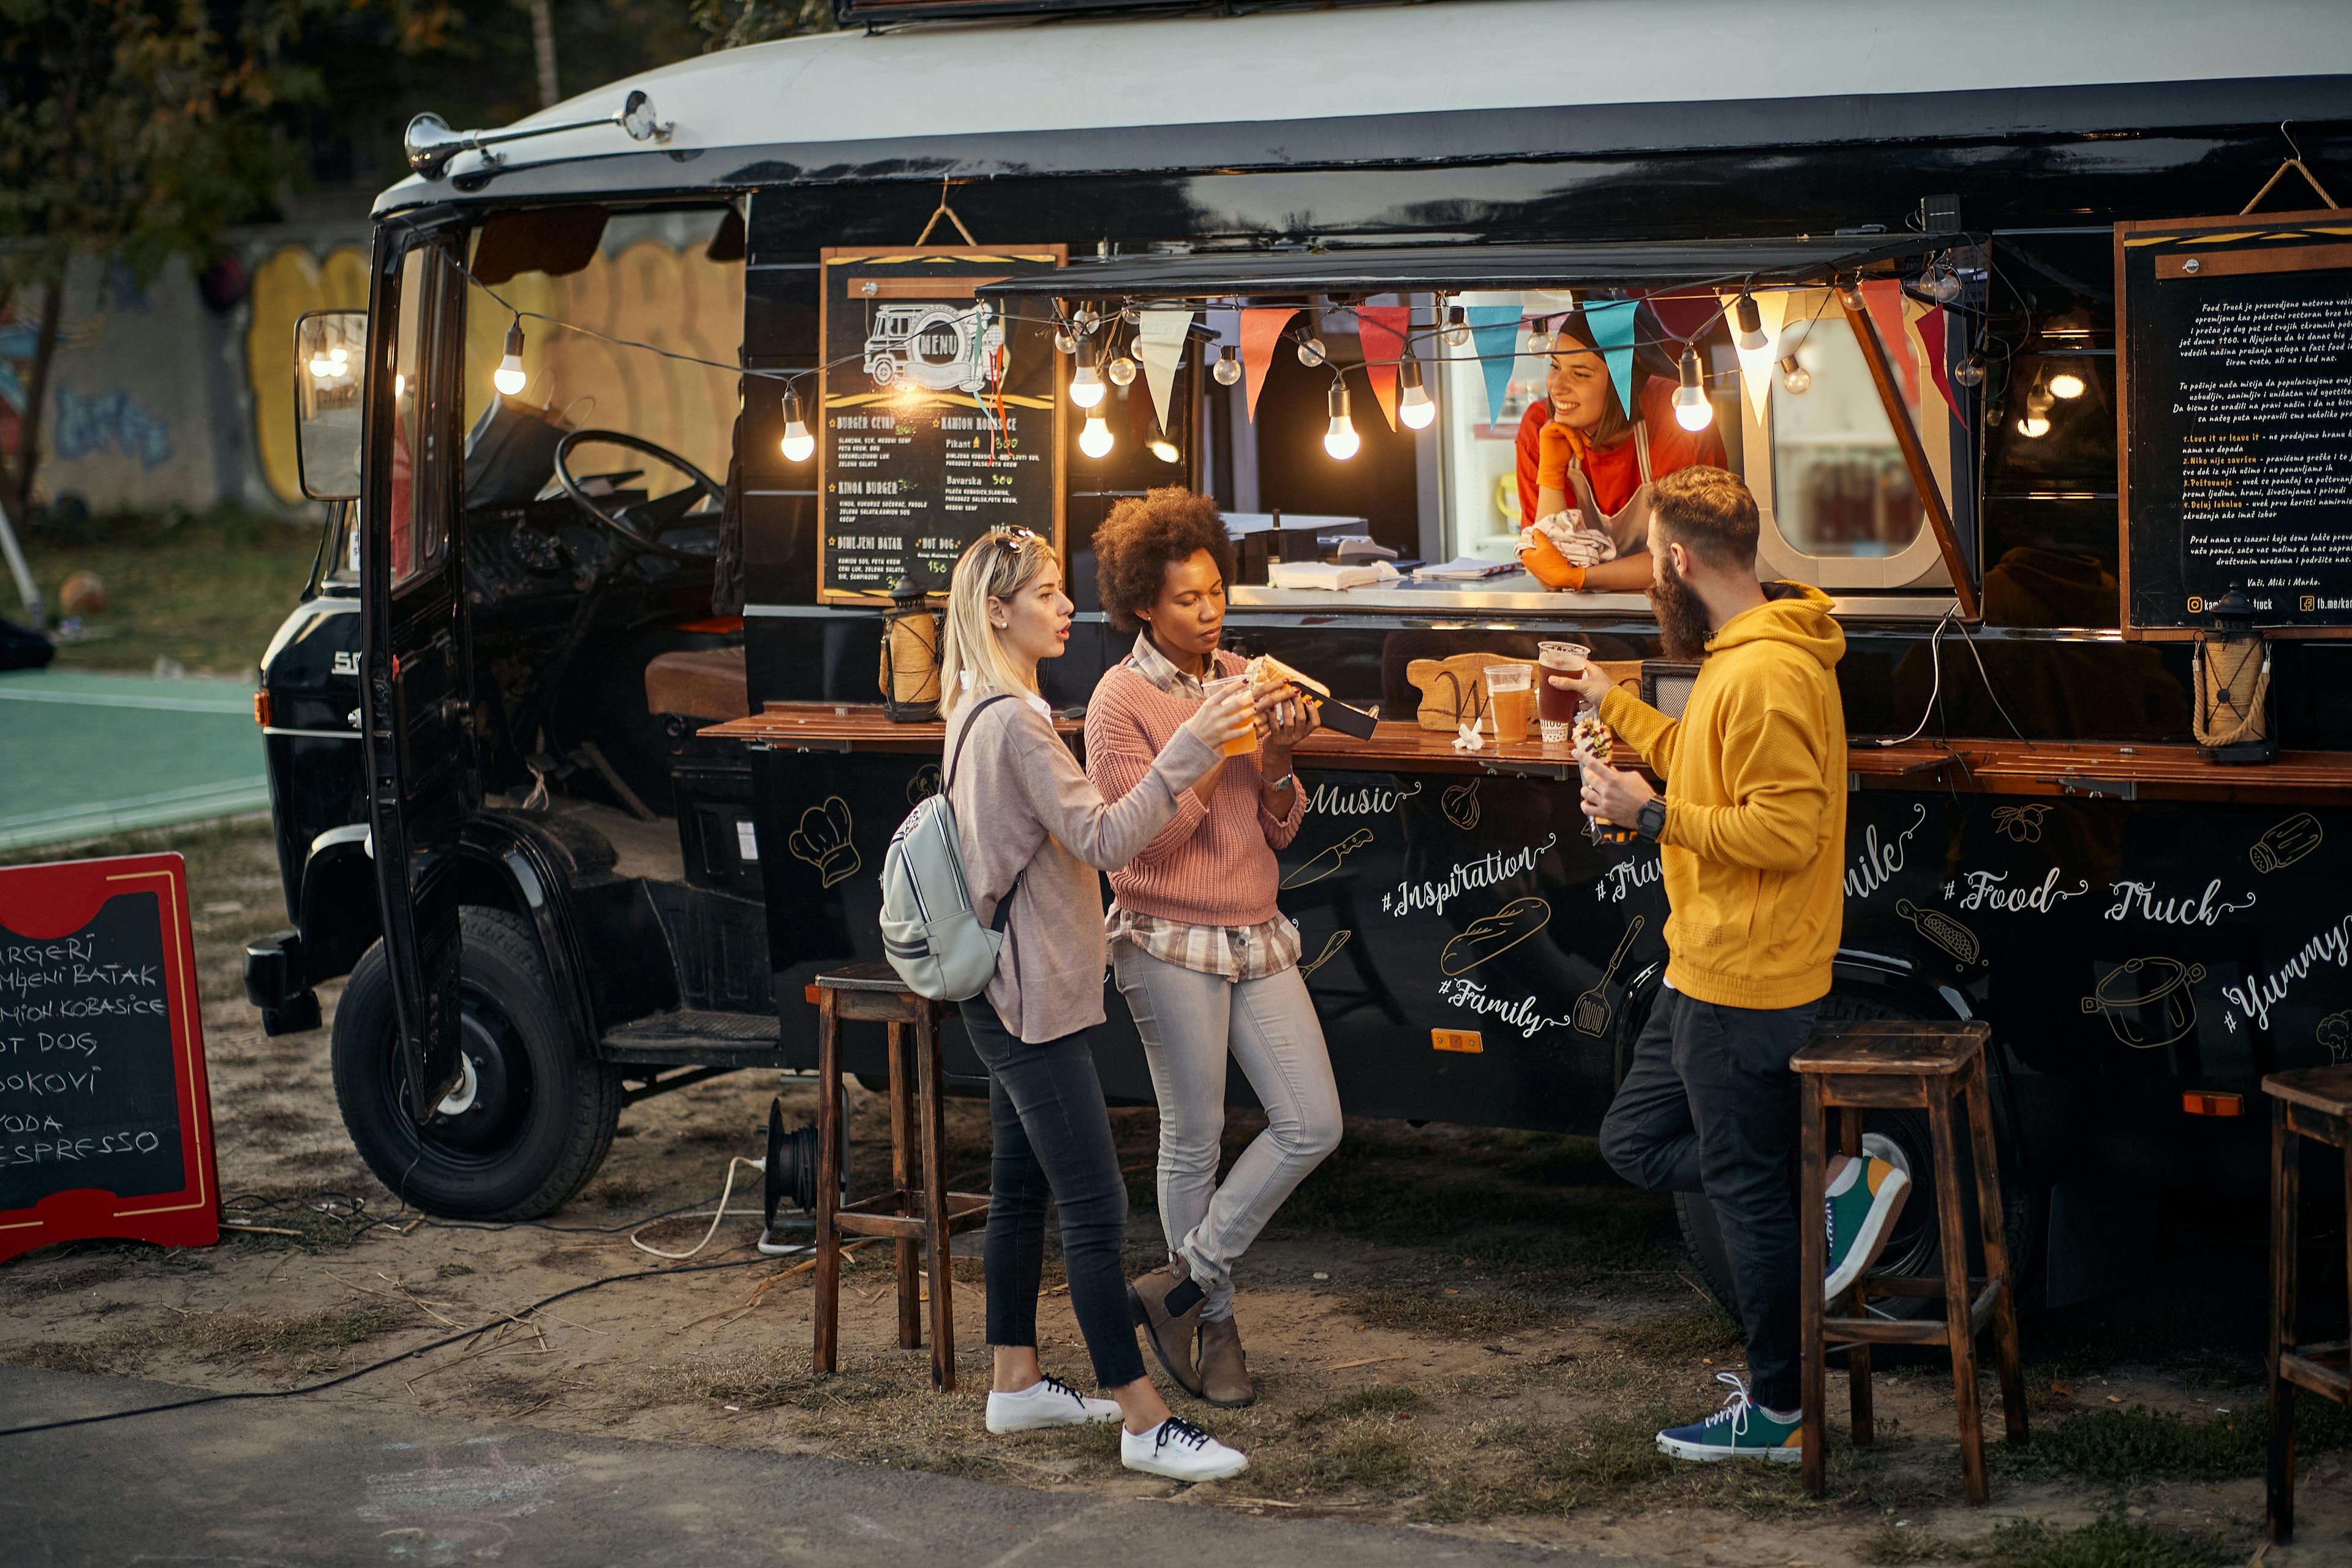 two women and a man stand in front of a black food truck enjoying food and drink served by a woman in a red shirt. the food truck has a menu on the side 